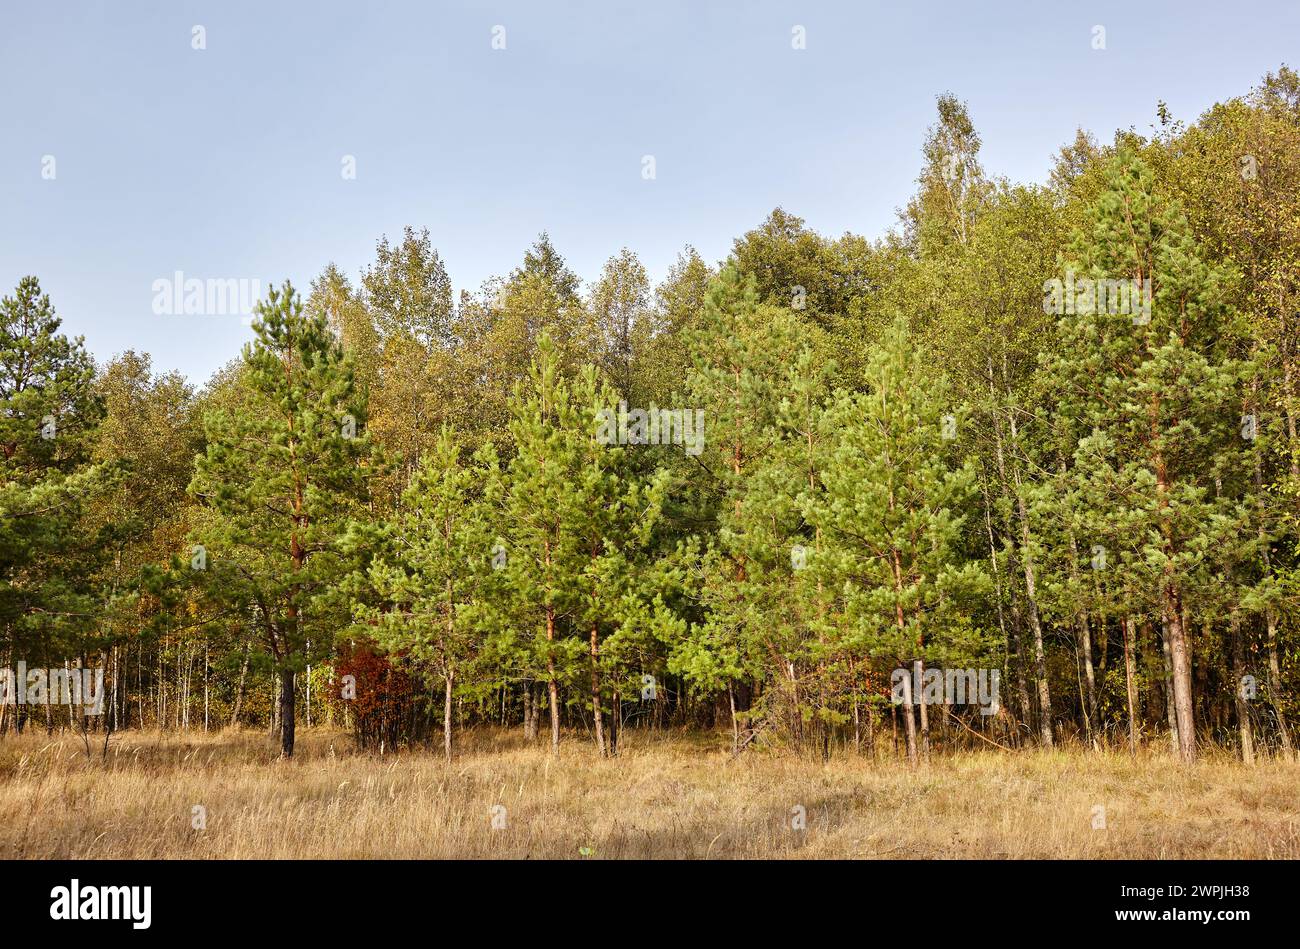 Conifer trees in the forest against a blue sky on a sunny day. Beautiful nature landscape Stock Photo